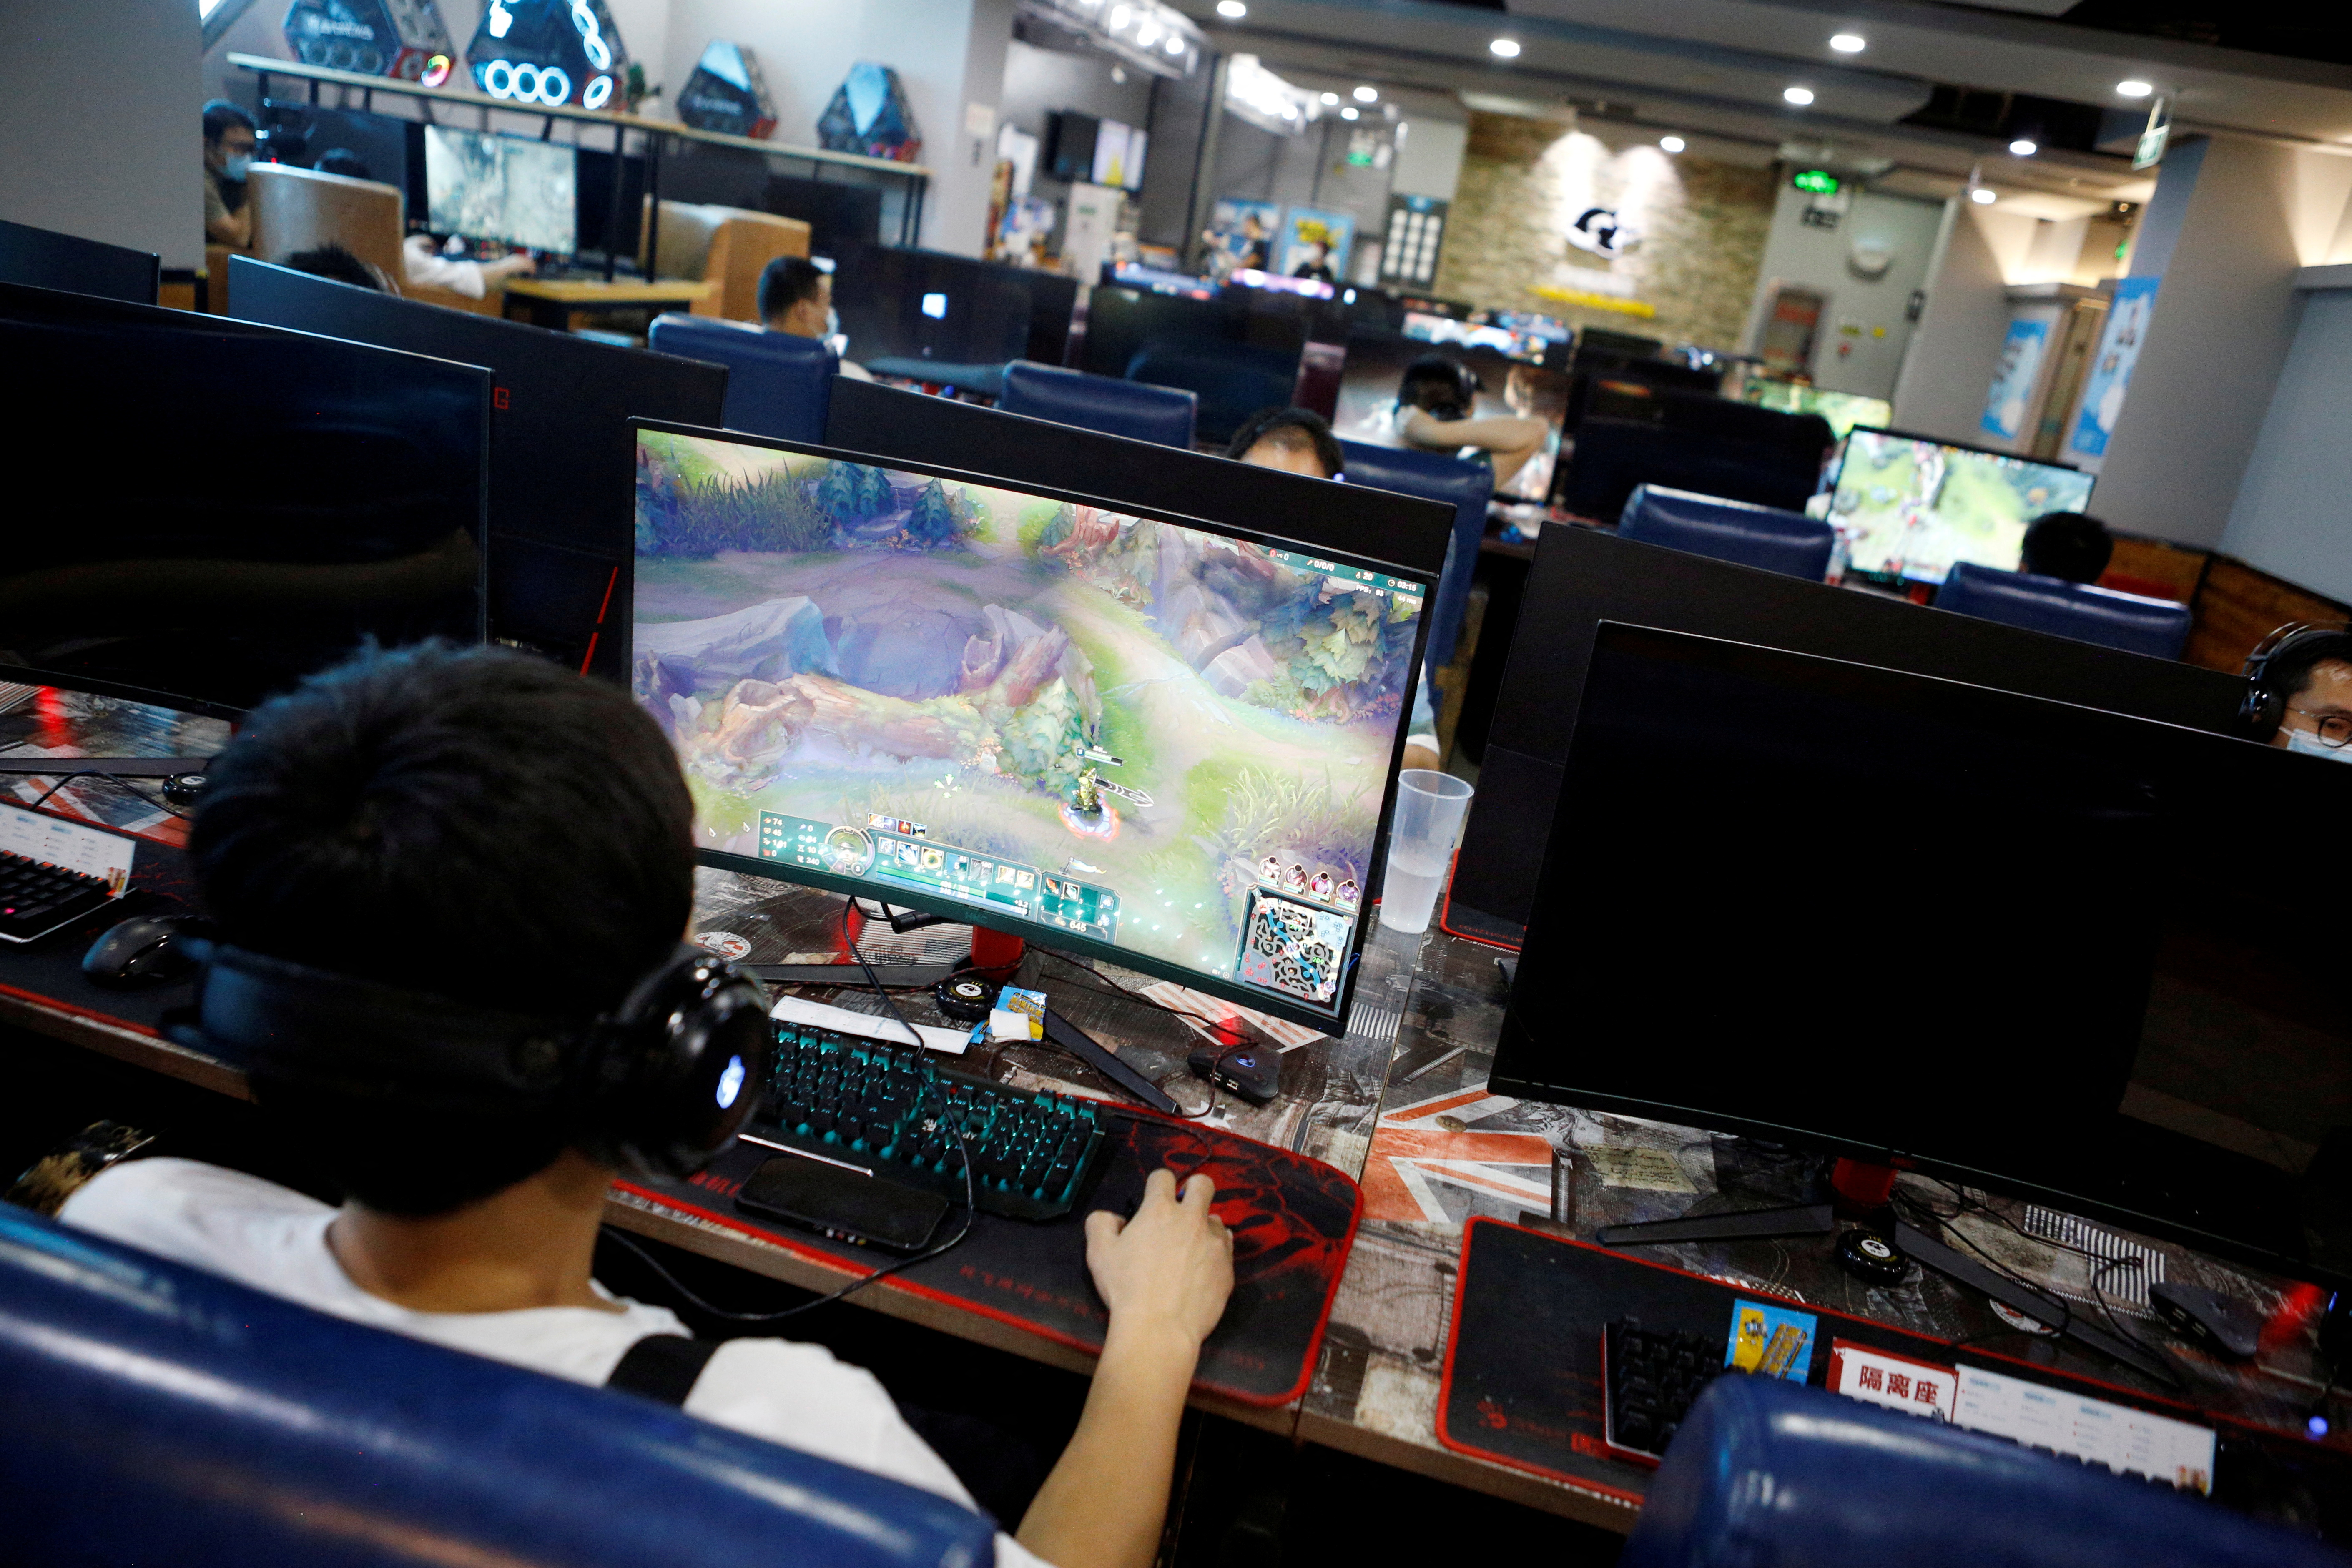 FILE PHOTO: People play online games on computers at an internet cafe in Beijing